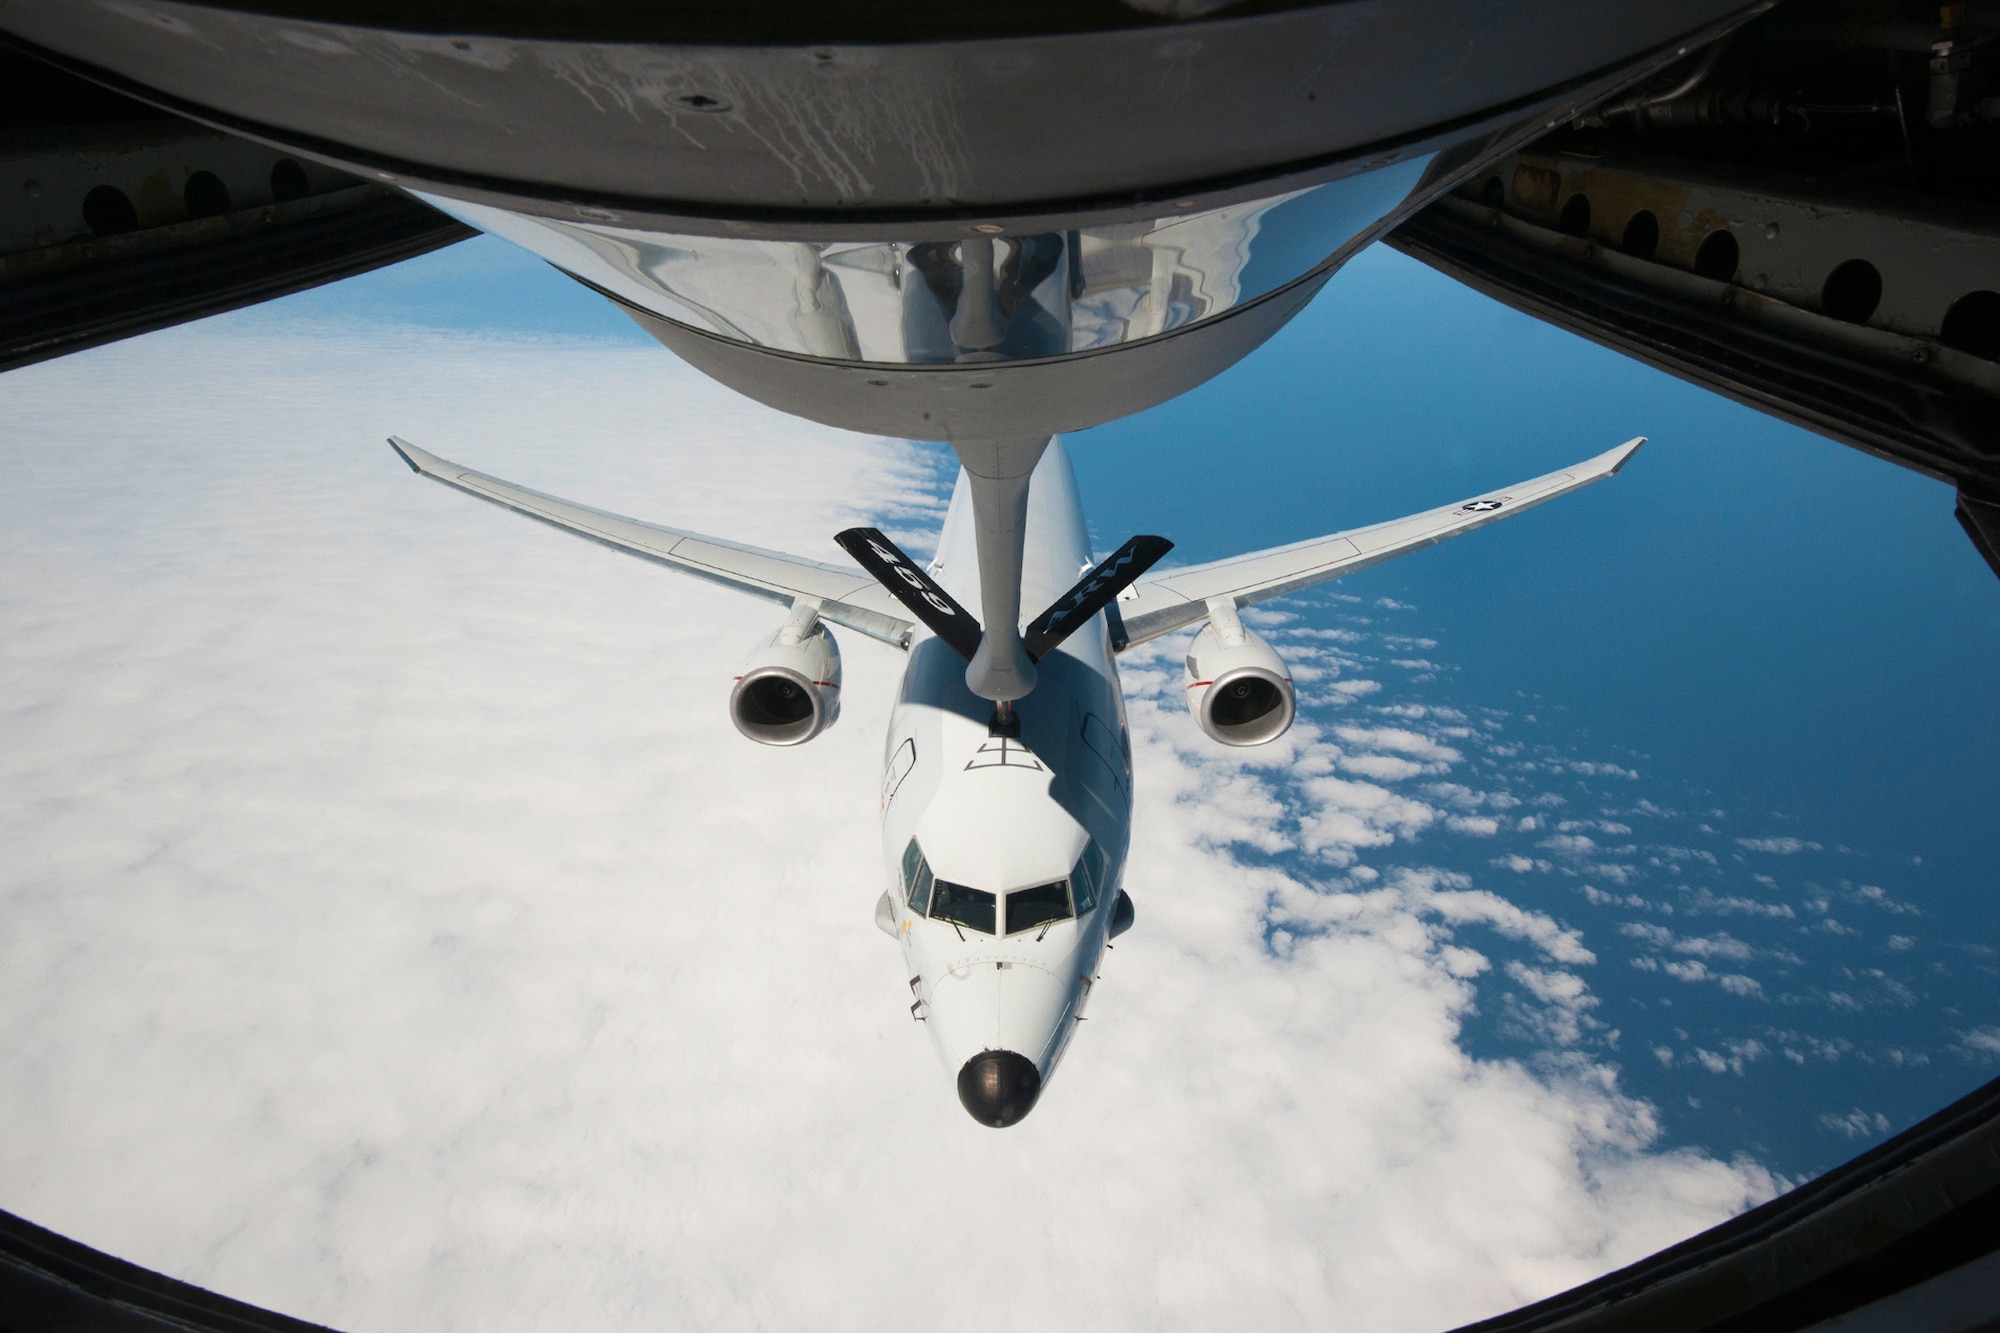 A Naval Air Systems Command P-8A Poseidon is refueled by a 459th Air Refueling Squadron KC-135R Stratotanker over the Atlantic Ocean April 13, 2017. This was the first inflight refueling of a P-8A. The P-8A is the second-ever Navy aircraft to be fitted with a receiver for aerial refueling; the first being the E-6B Mercury nearly 30 years ago. (U.S. Air Force photo/Tech. Sgt. Kat Justen)

